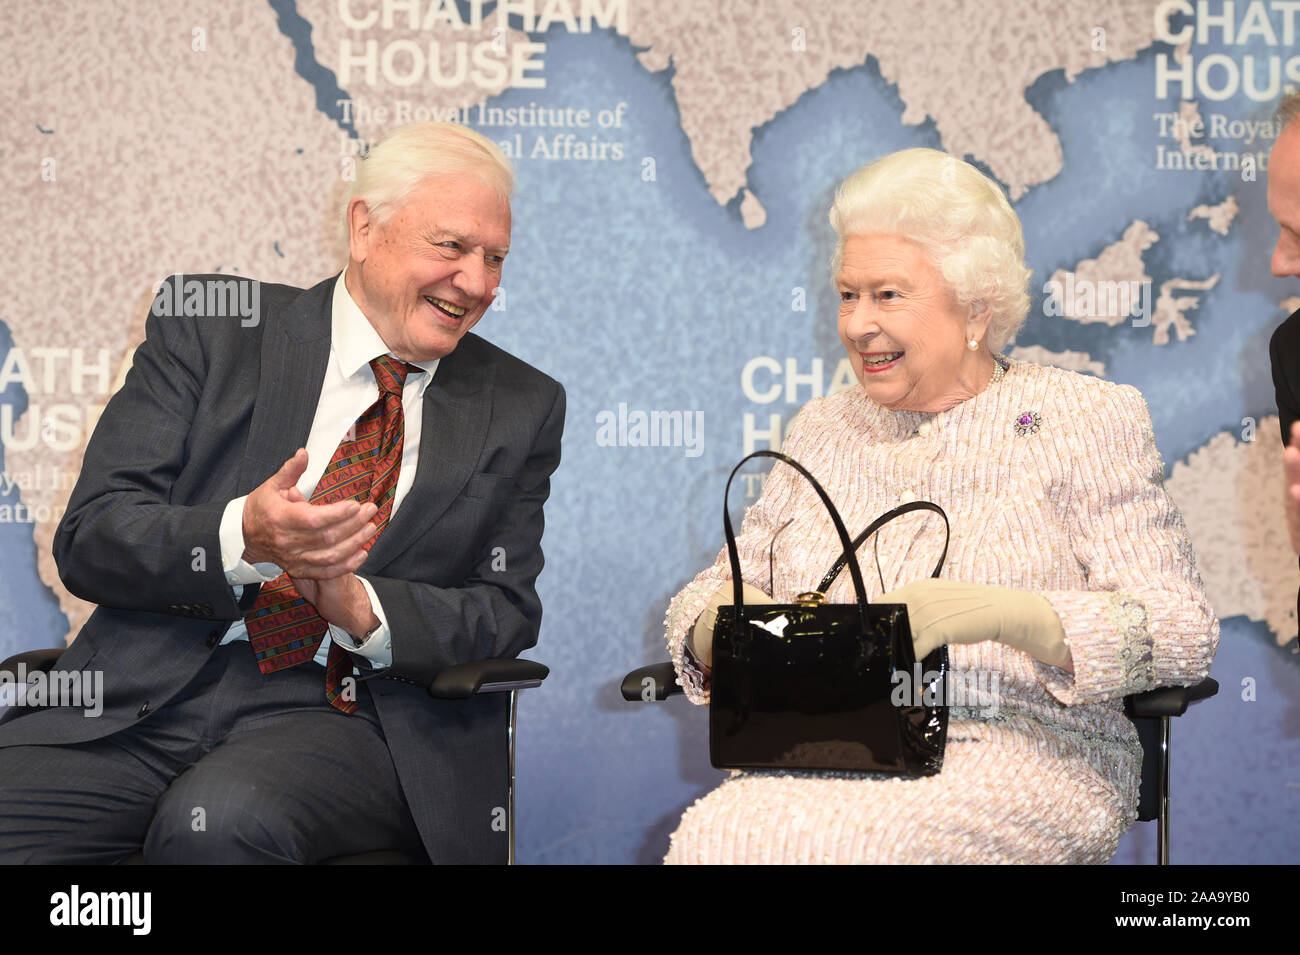 Queen Elizabeth II alongside Sir David Attenborough at the Royal institute of International Affairs, Chatham House, London, where she presented the Chatham House Prize 2019 to the 93-year-old broadcaster and Julian Hector, Head of the BBC Natural History Unit. Stock Photo